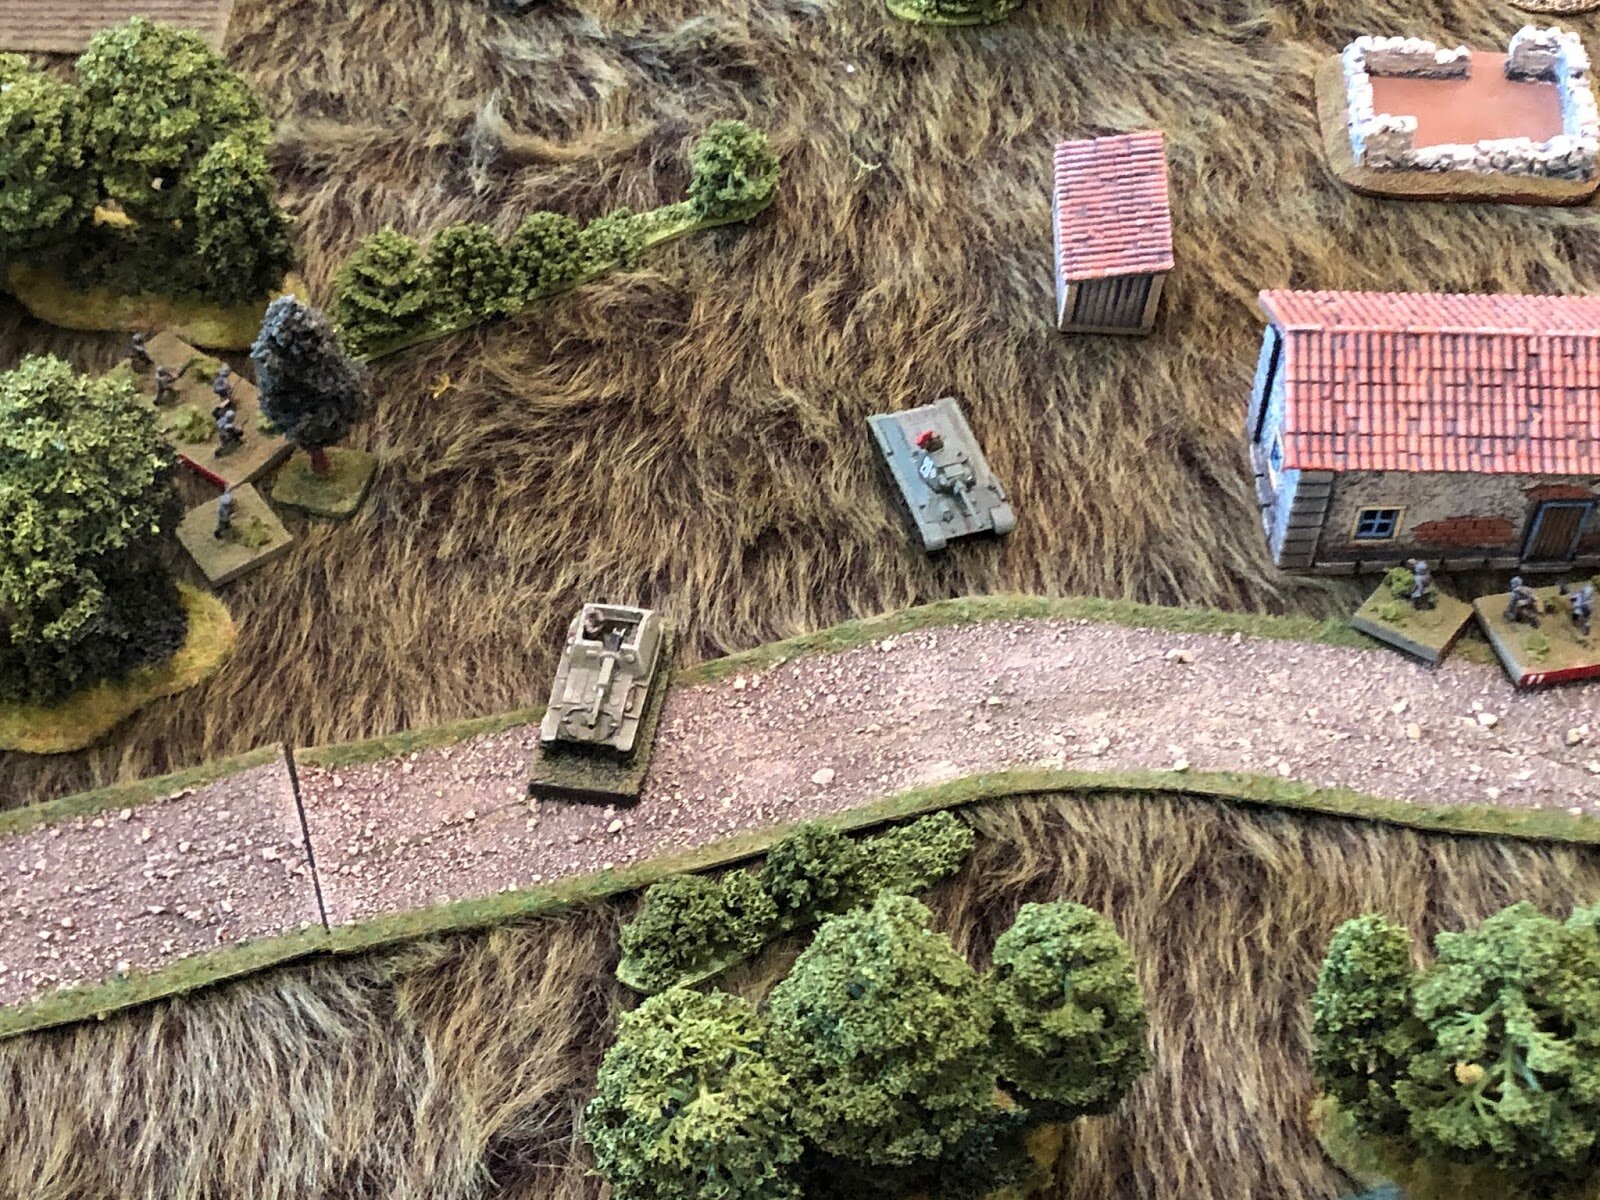  Moving top to bottom, the Soviet T-34 and Su-76 Platoon Commanders know they are in constricted terrain and are absolutely, acutely aware of the threat.  Their heads are up and their eyes are scanning for threats, but they're so focused on the threa